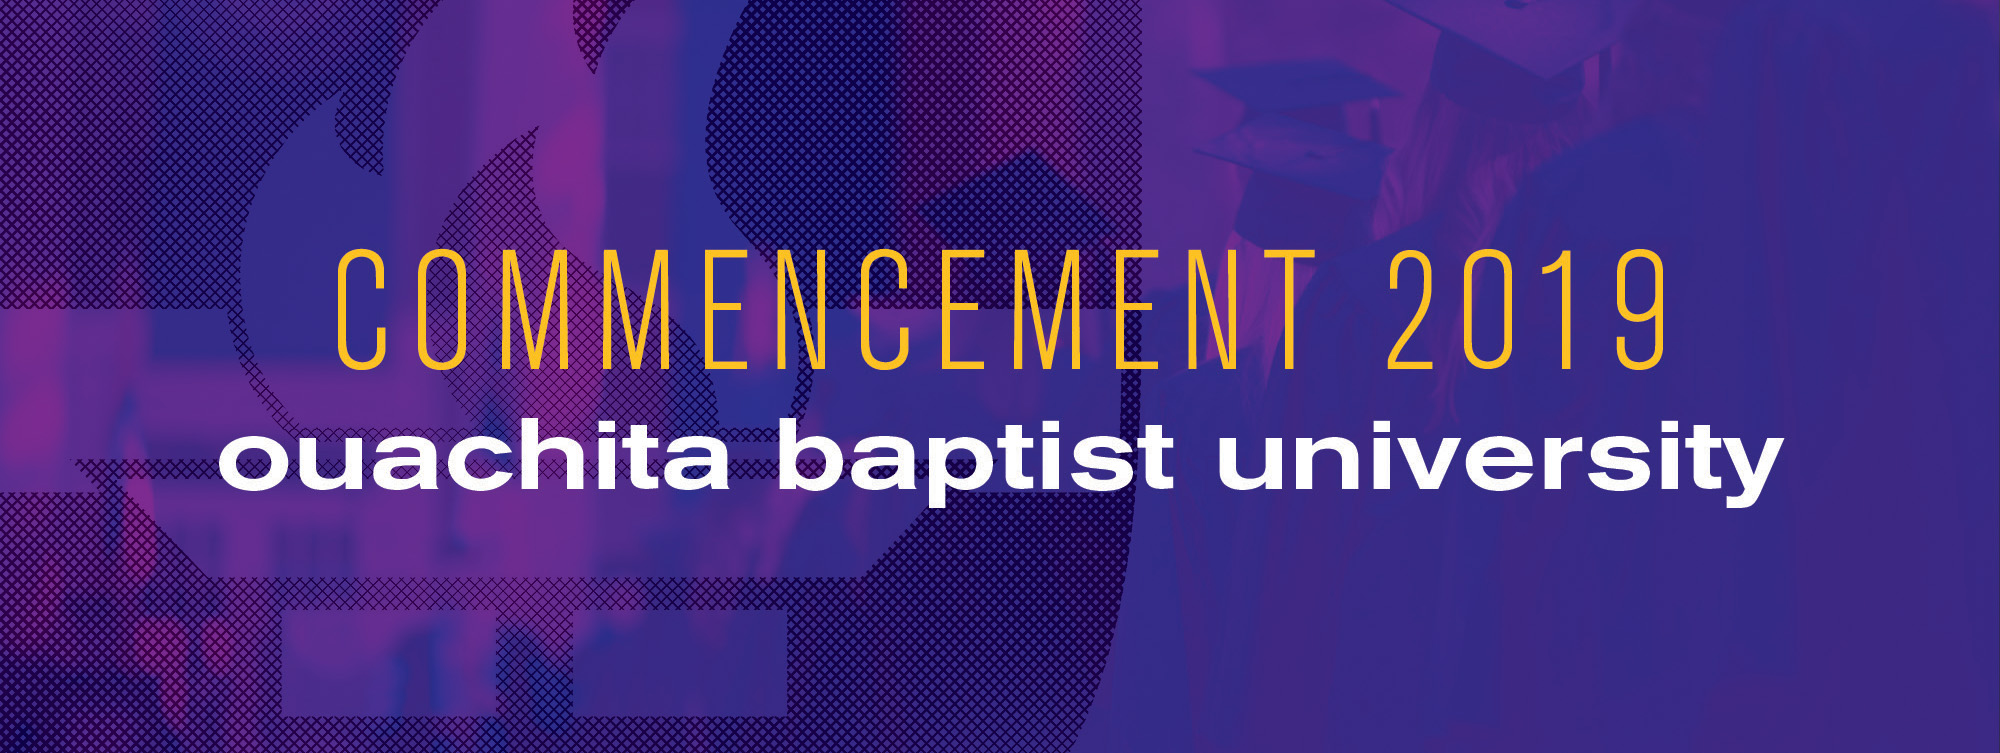  Ouachita to hold 132nd spring commencement ceremony May 11.